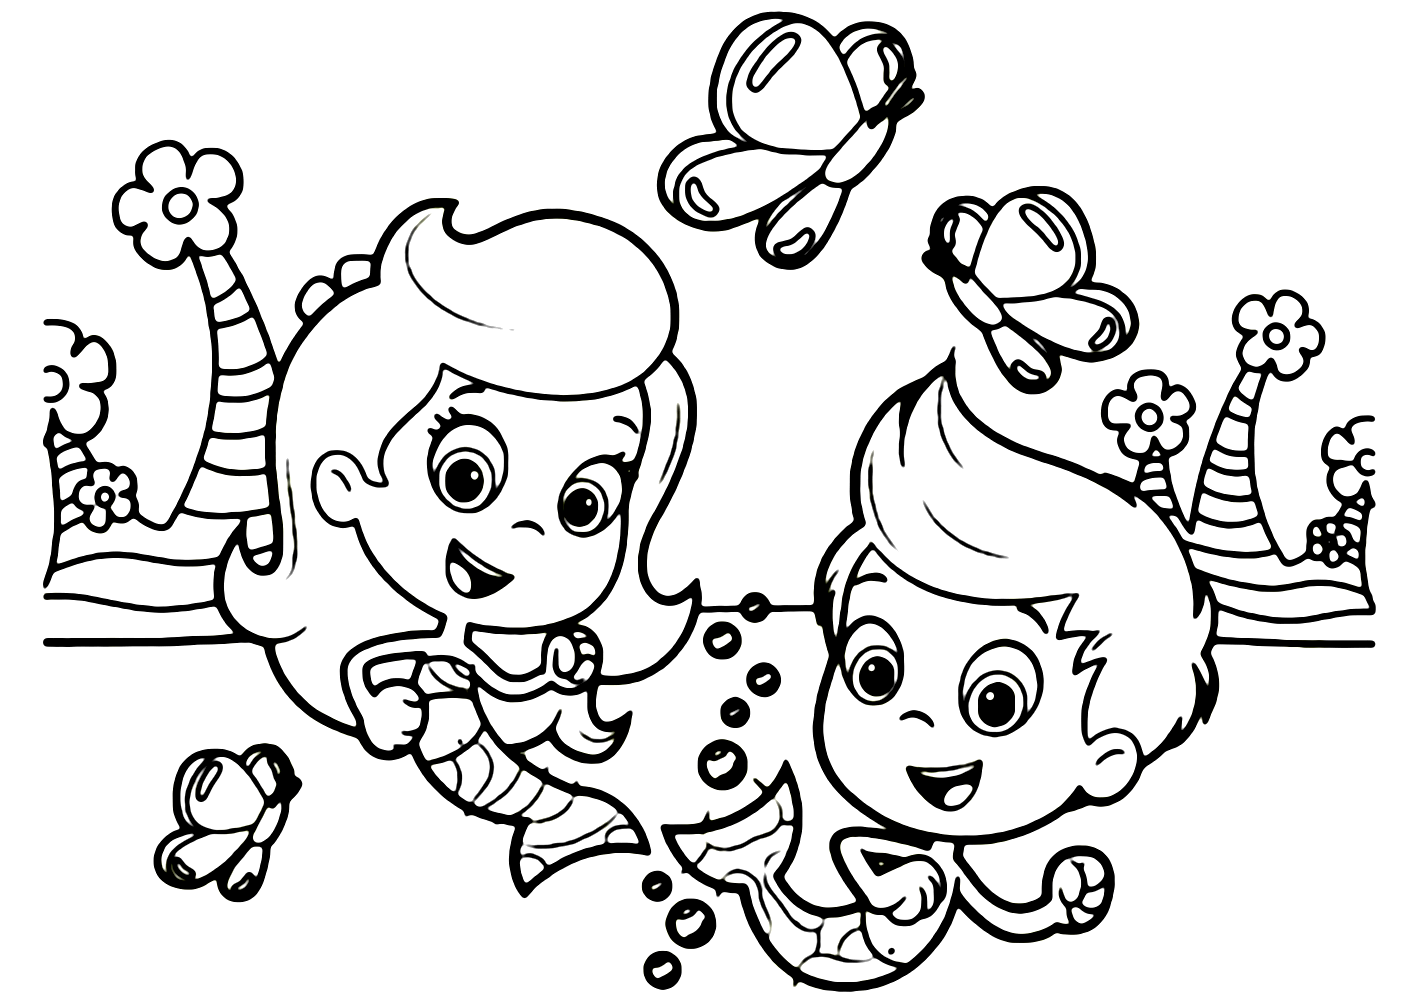 Bubble Guppy Characters Coloring Page